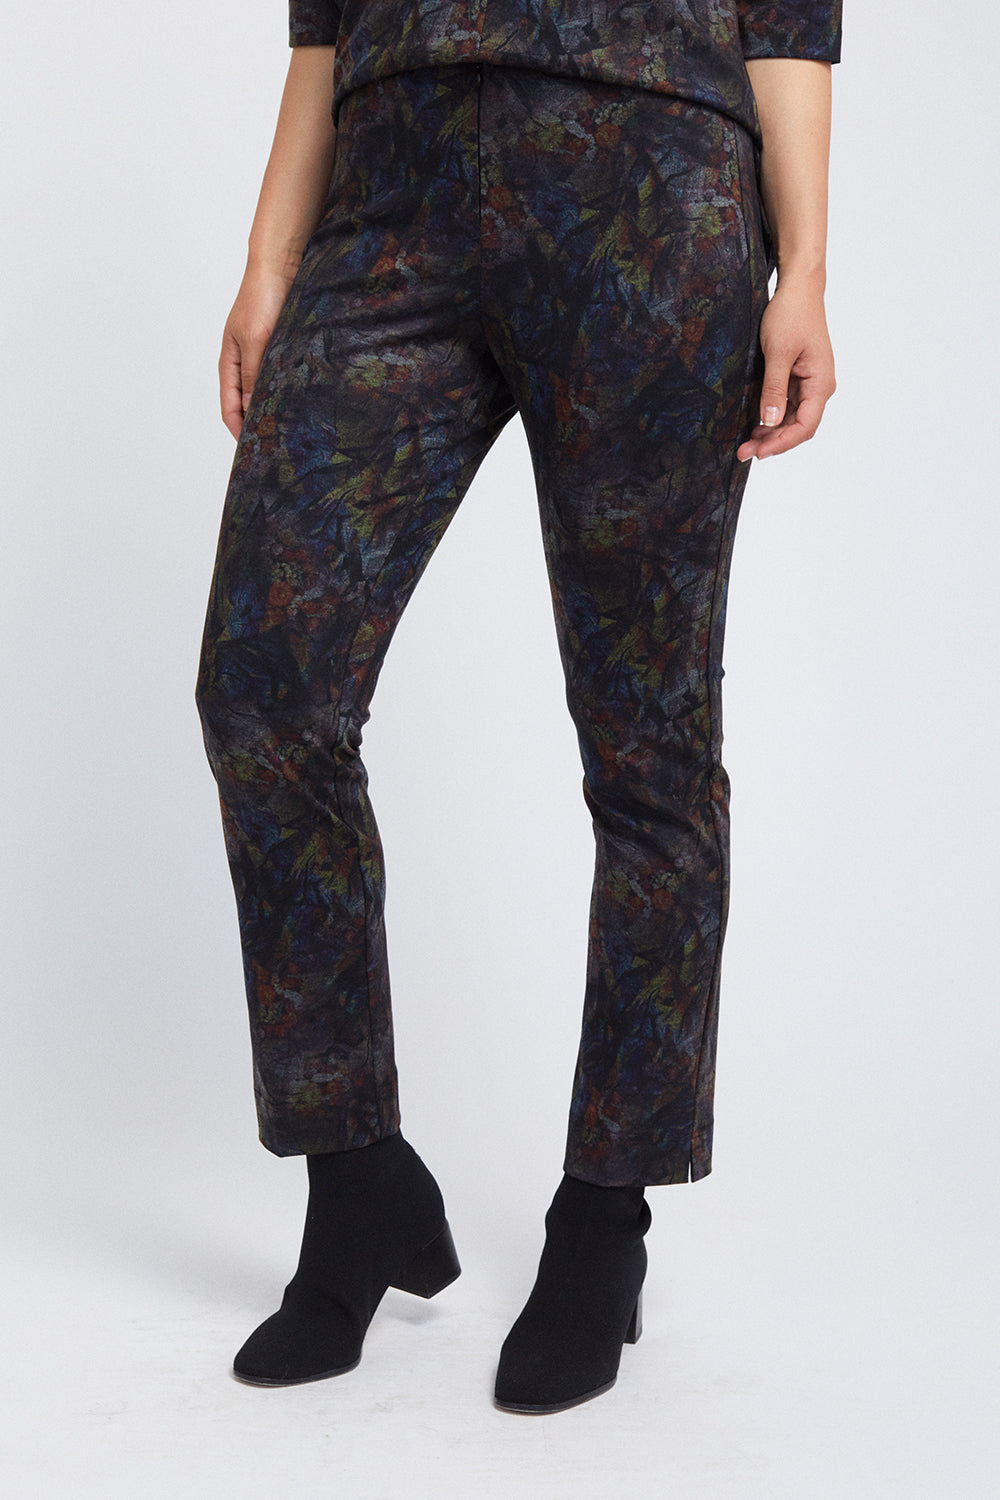 Kaylee Pant - Stained Glass: FINAL SALE